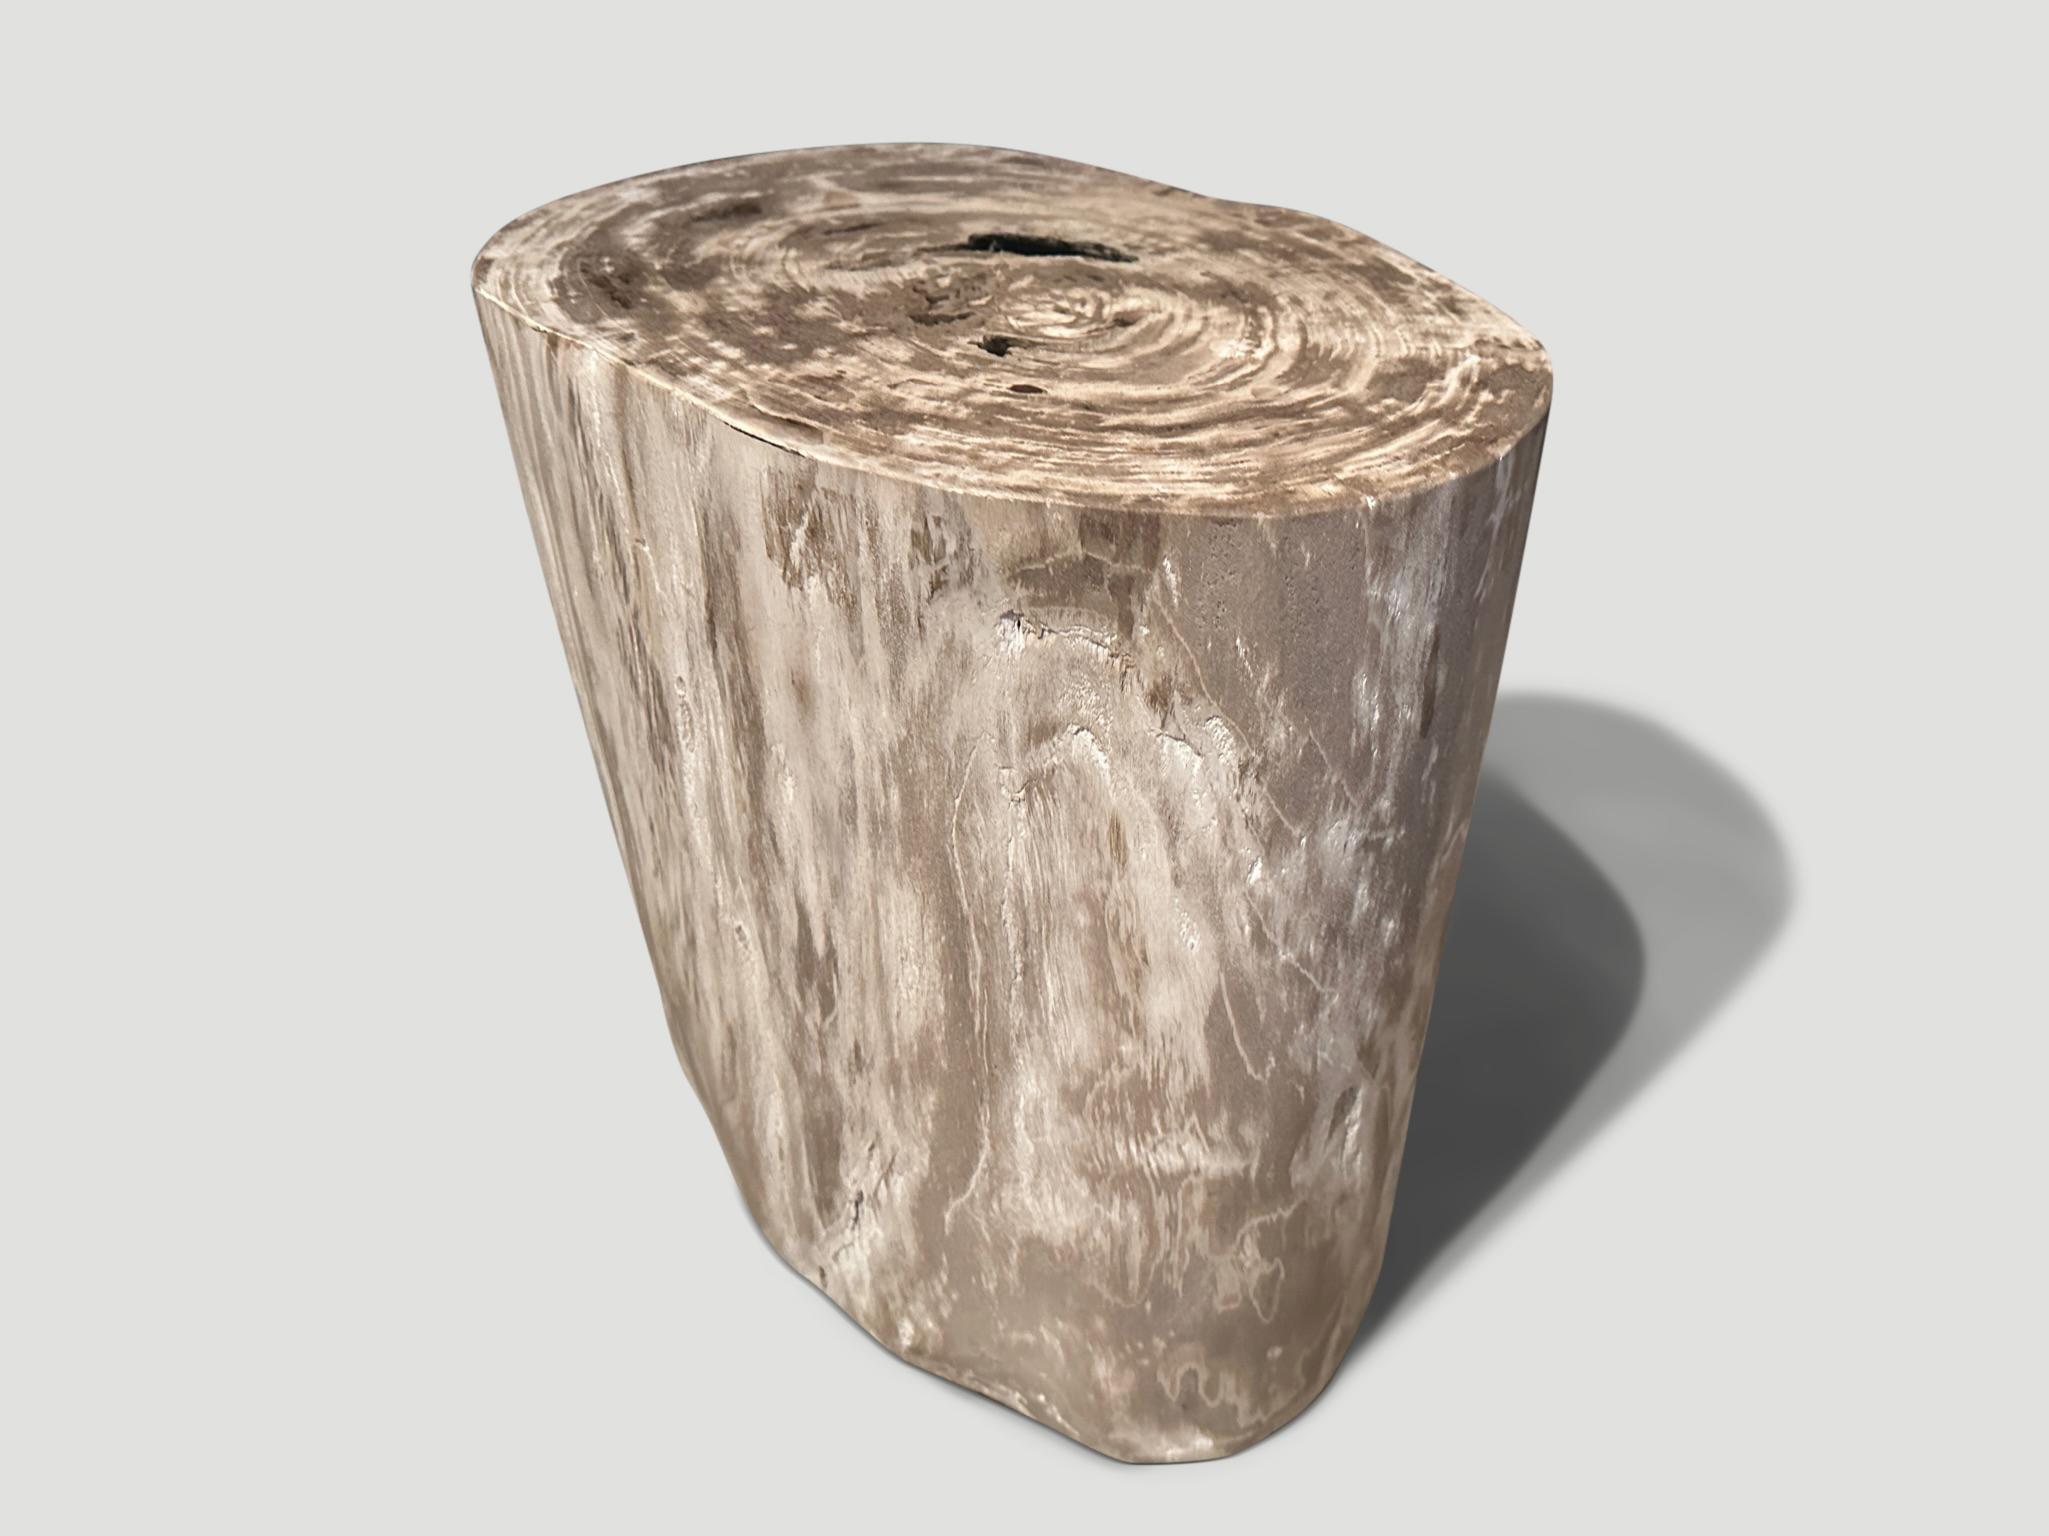 Impressive minimalist petrified wood side table. The pale tones are the hardest to source. It’s fascinating how Mother Nature produces these exquisite 40 million year old petrified teak logs with such contrasting colors and natural patterns